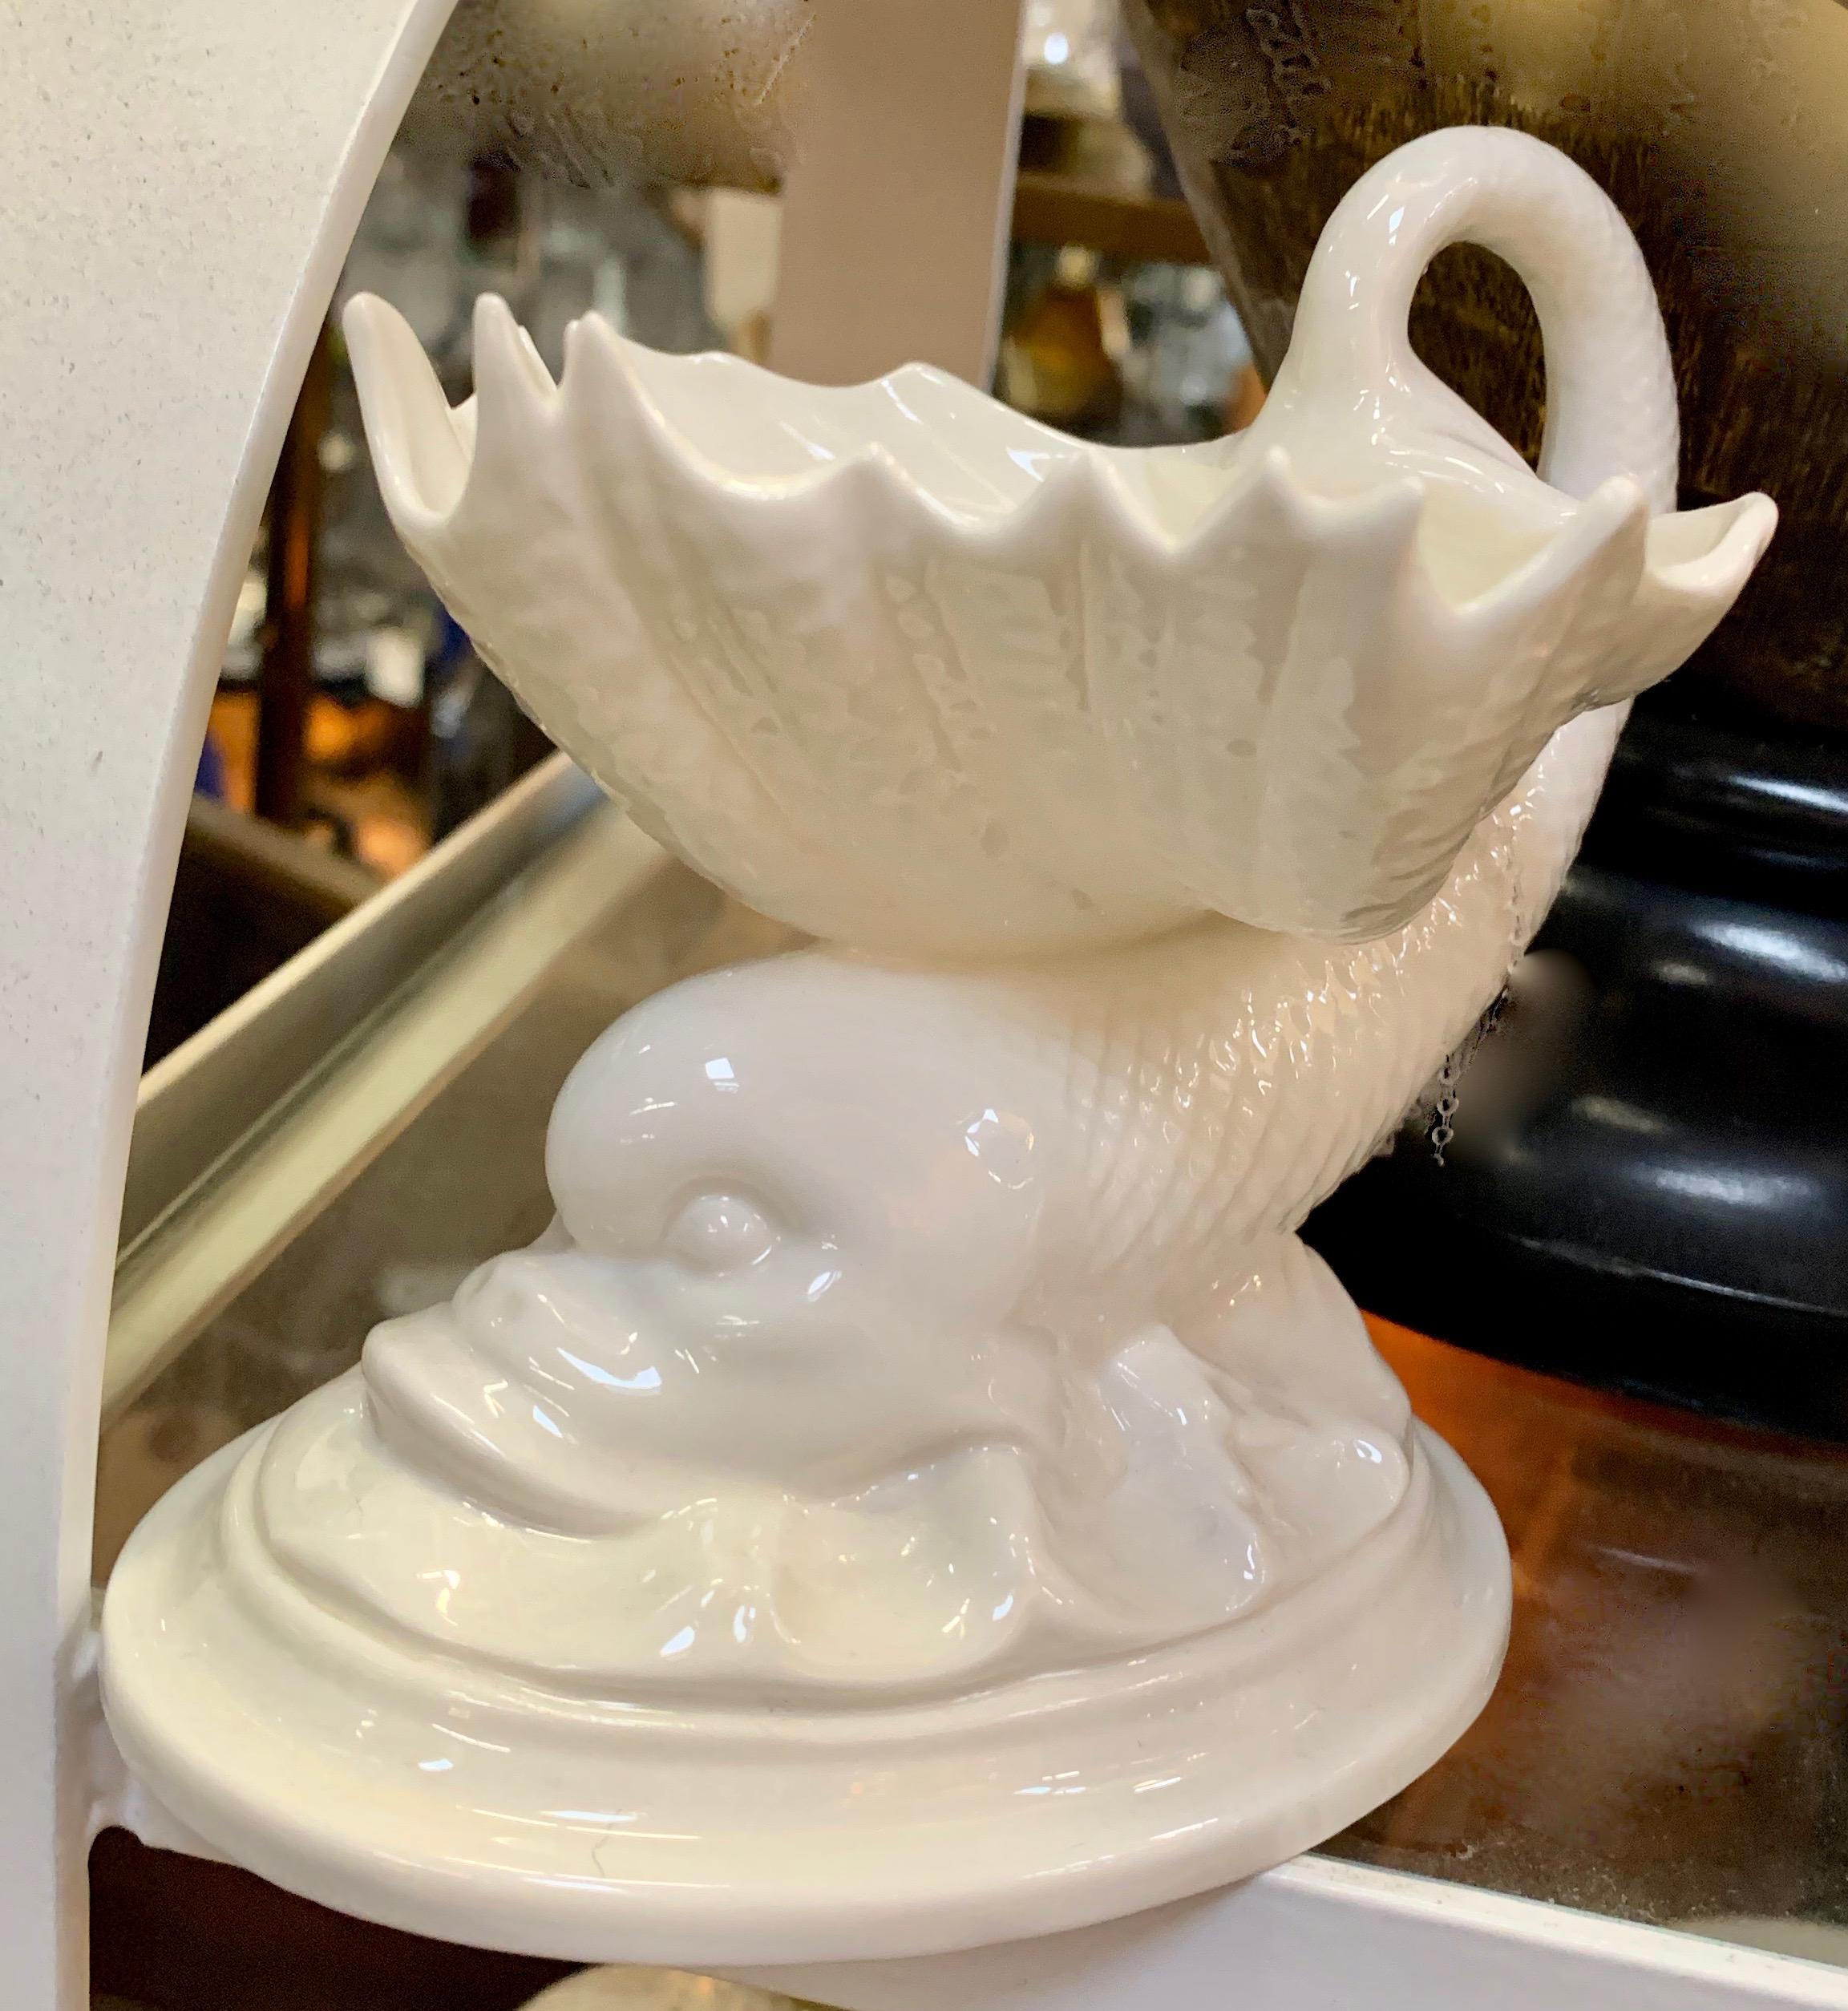 A wonderful bone China soap dish, a compliment to many bathrooms or kitchen sinks, could also be a candy dish.